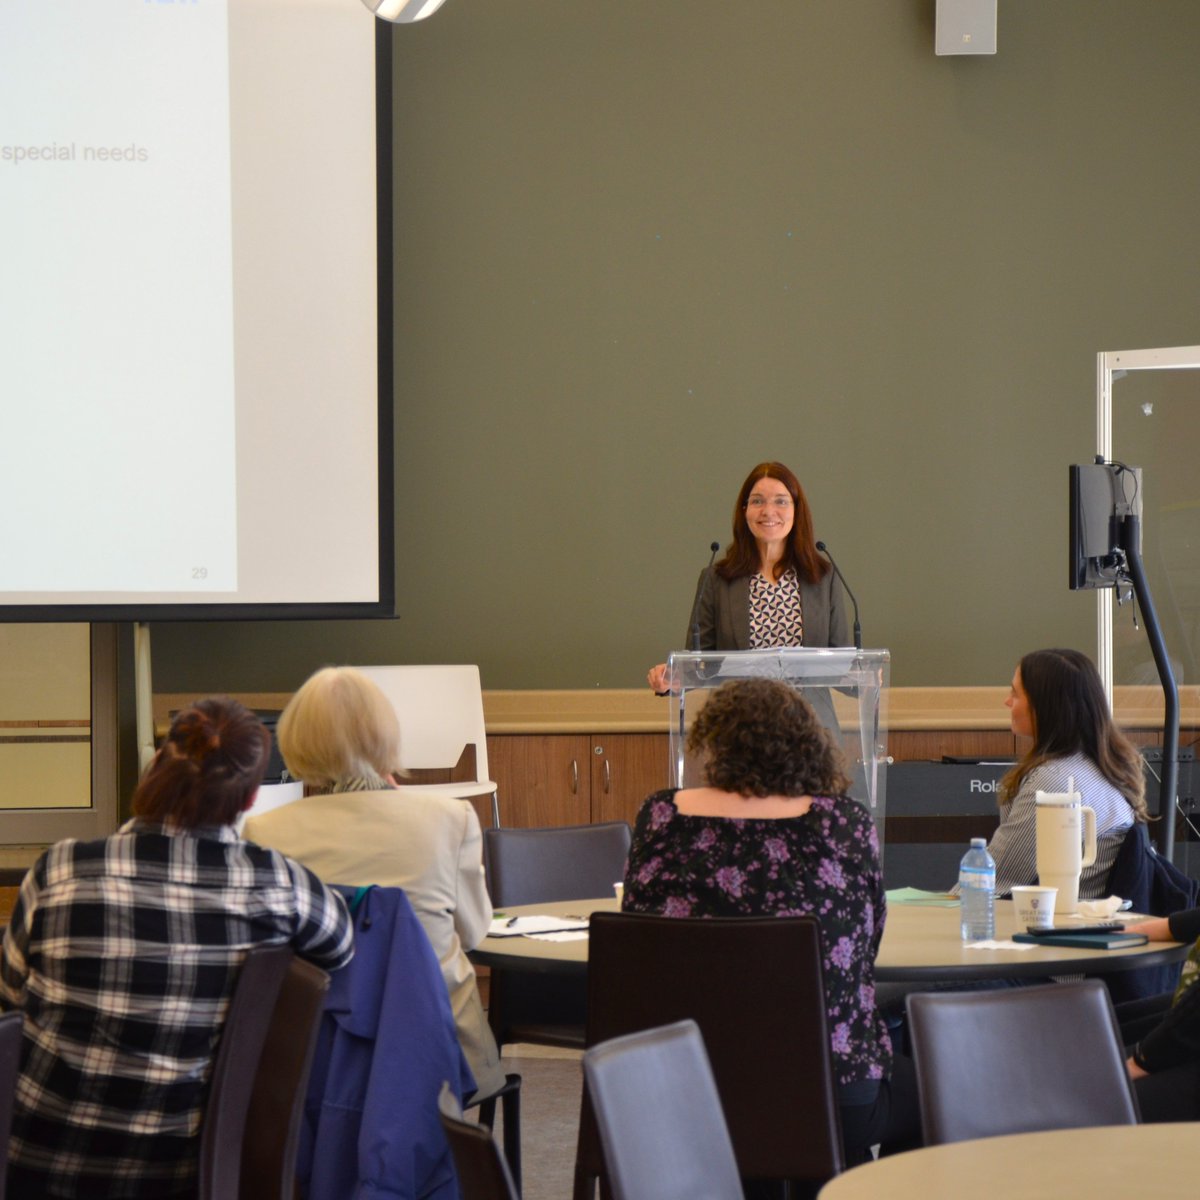 It was so great to dive into the research of Dr. Susanne Miesera and learn about inclusive education in Canada and Europe! Thank you to everyone who joined us in welcoming Dr. Miesera, who is visiting us from @TU_Muenchen to work alongside our @InclusiveEd